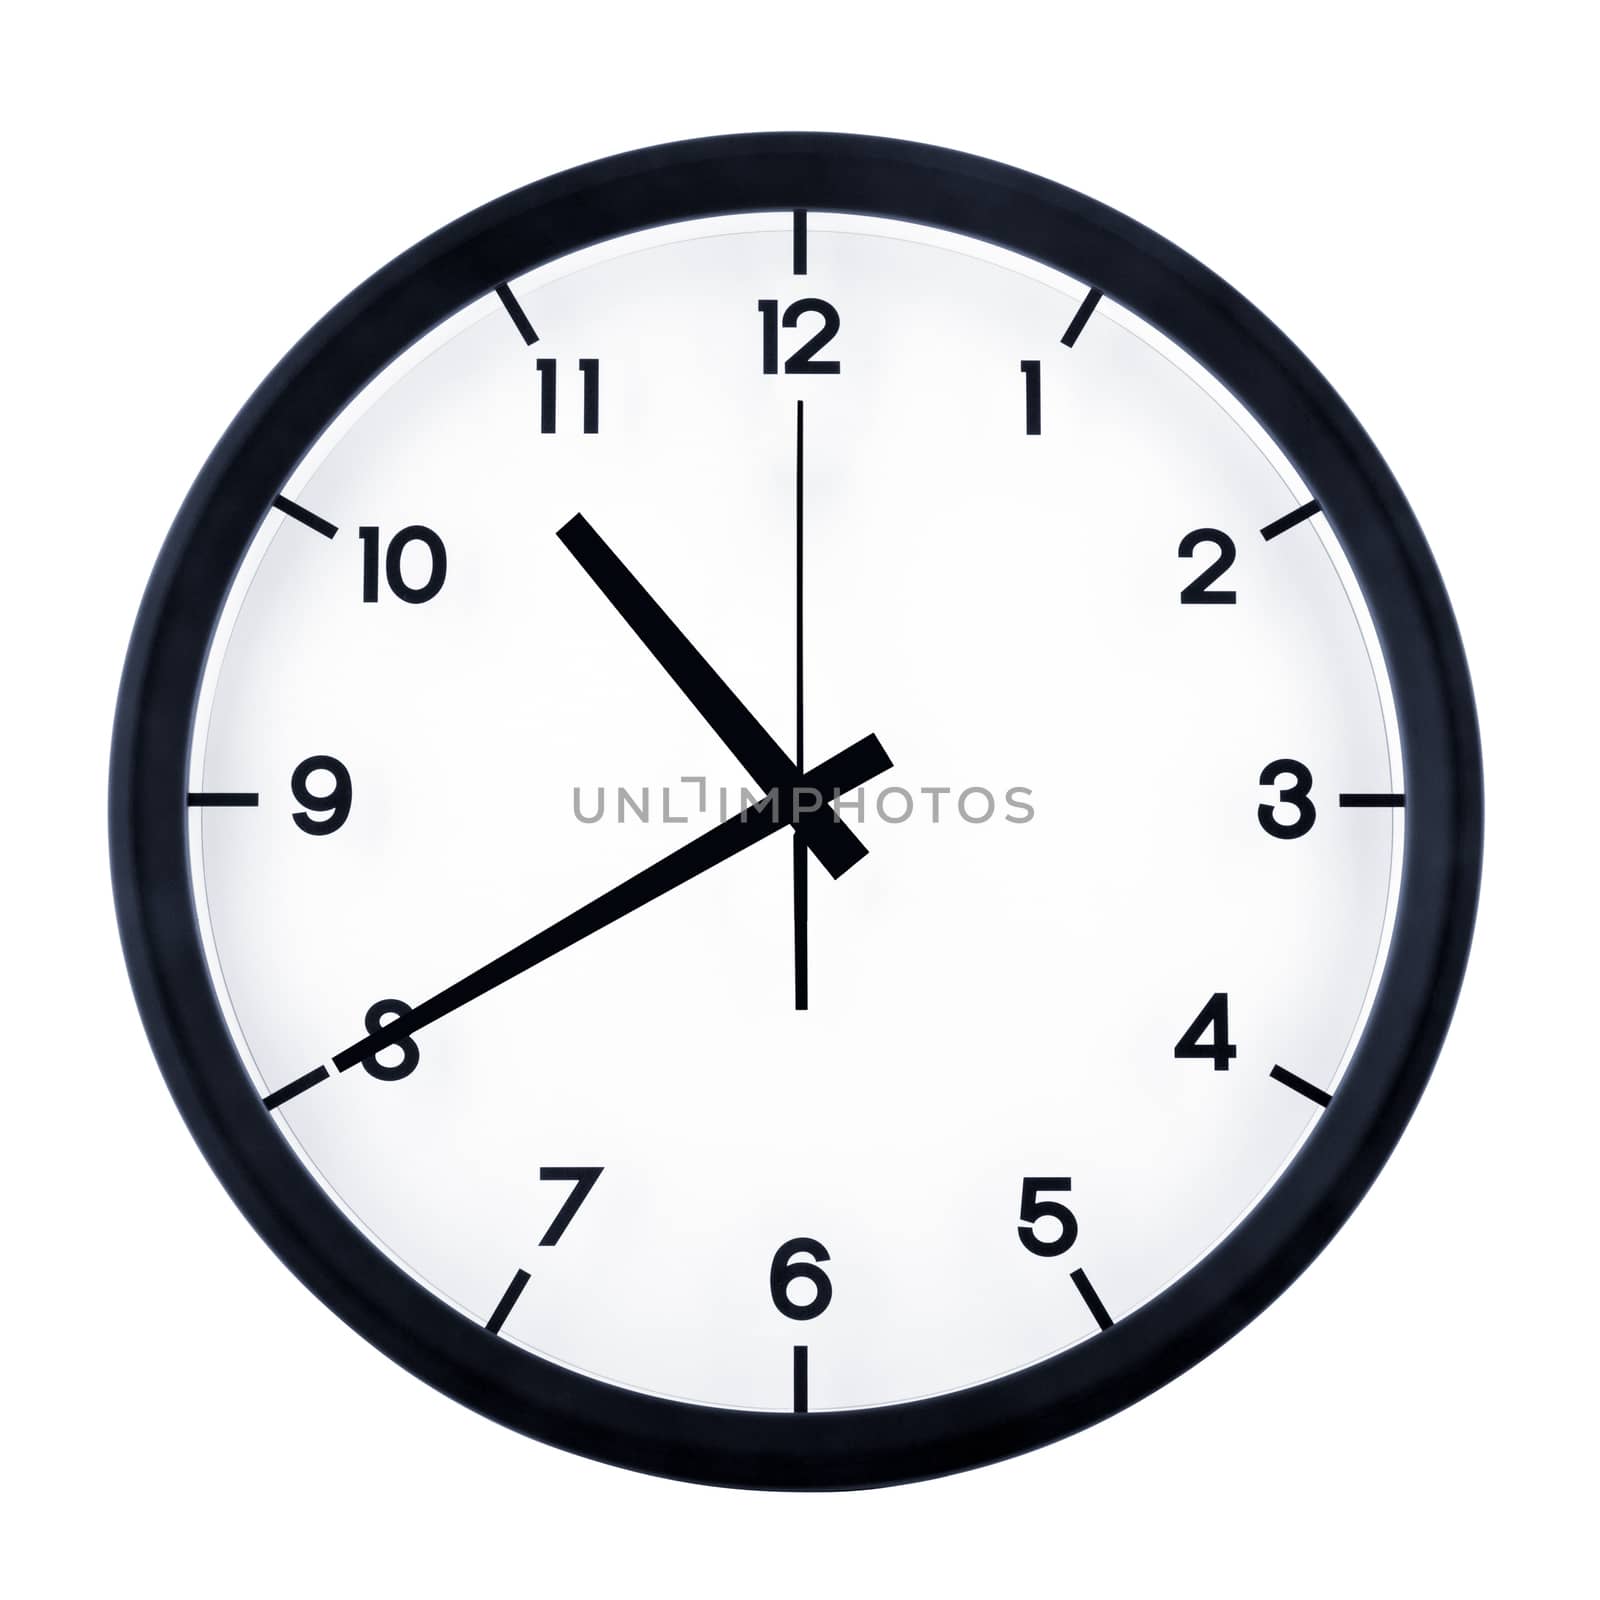 Classic analog clock pointing at ten forty, isolated on white background.